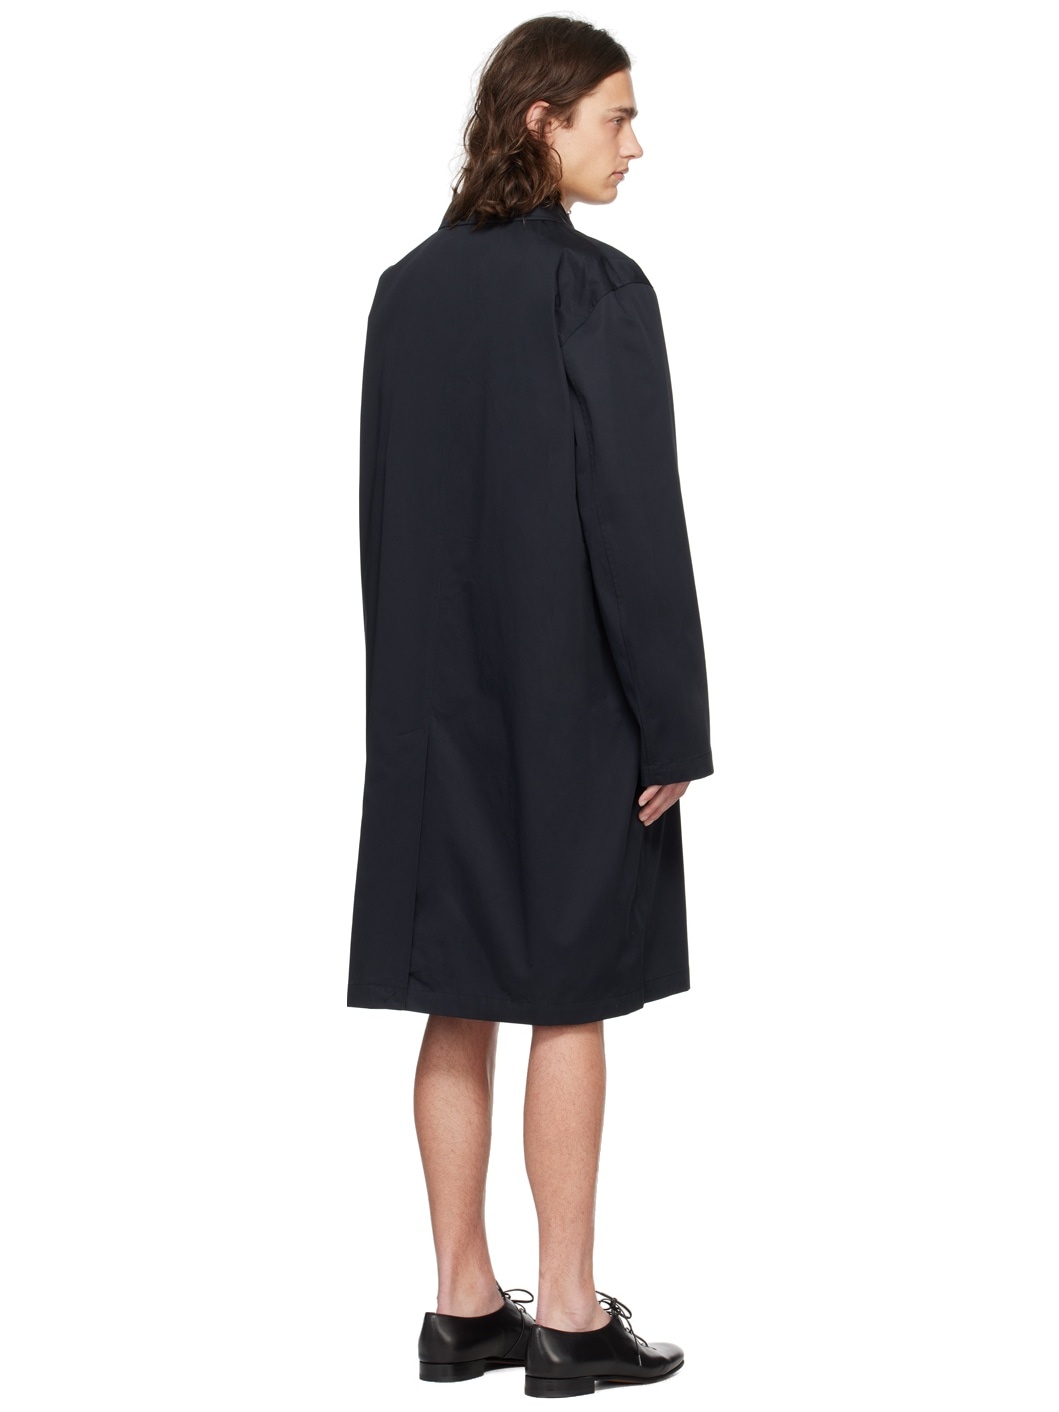 Black Notched Lapel Trench Coat - 3